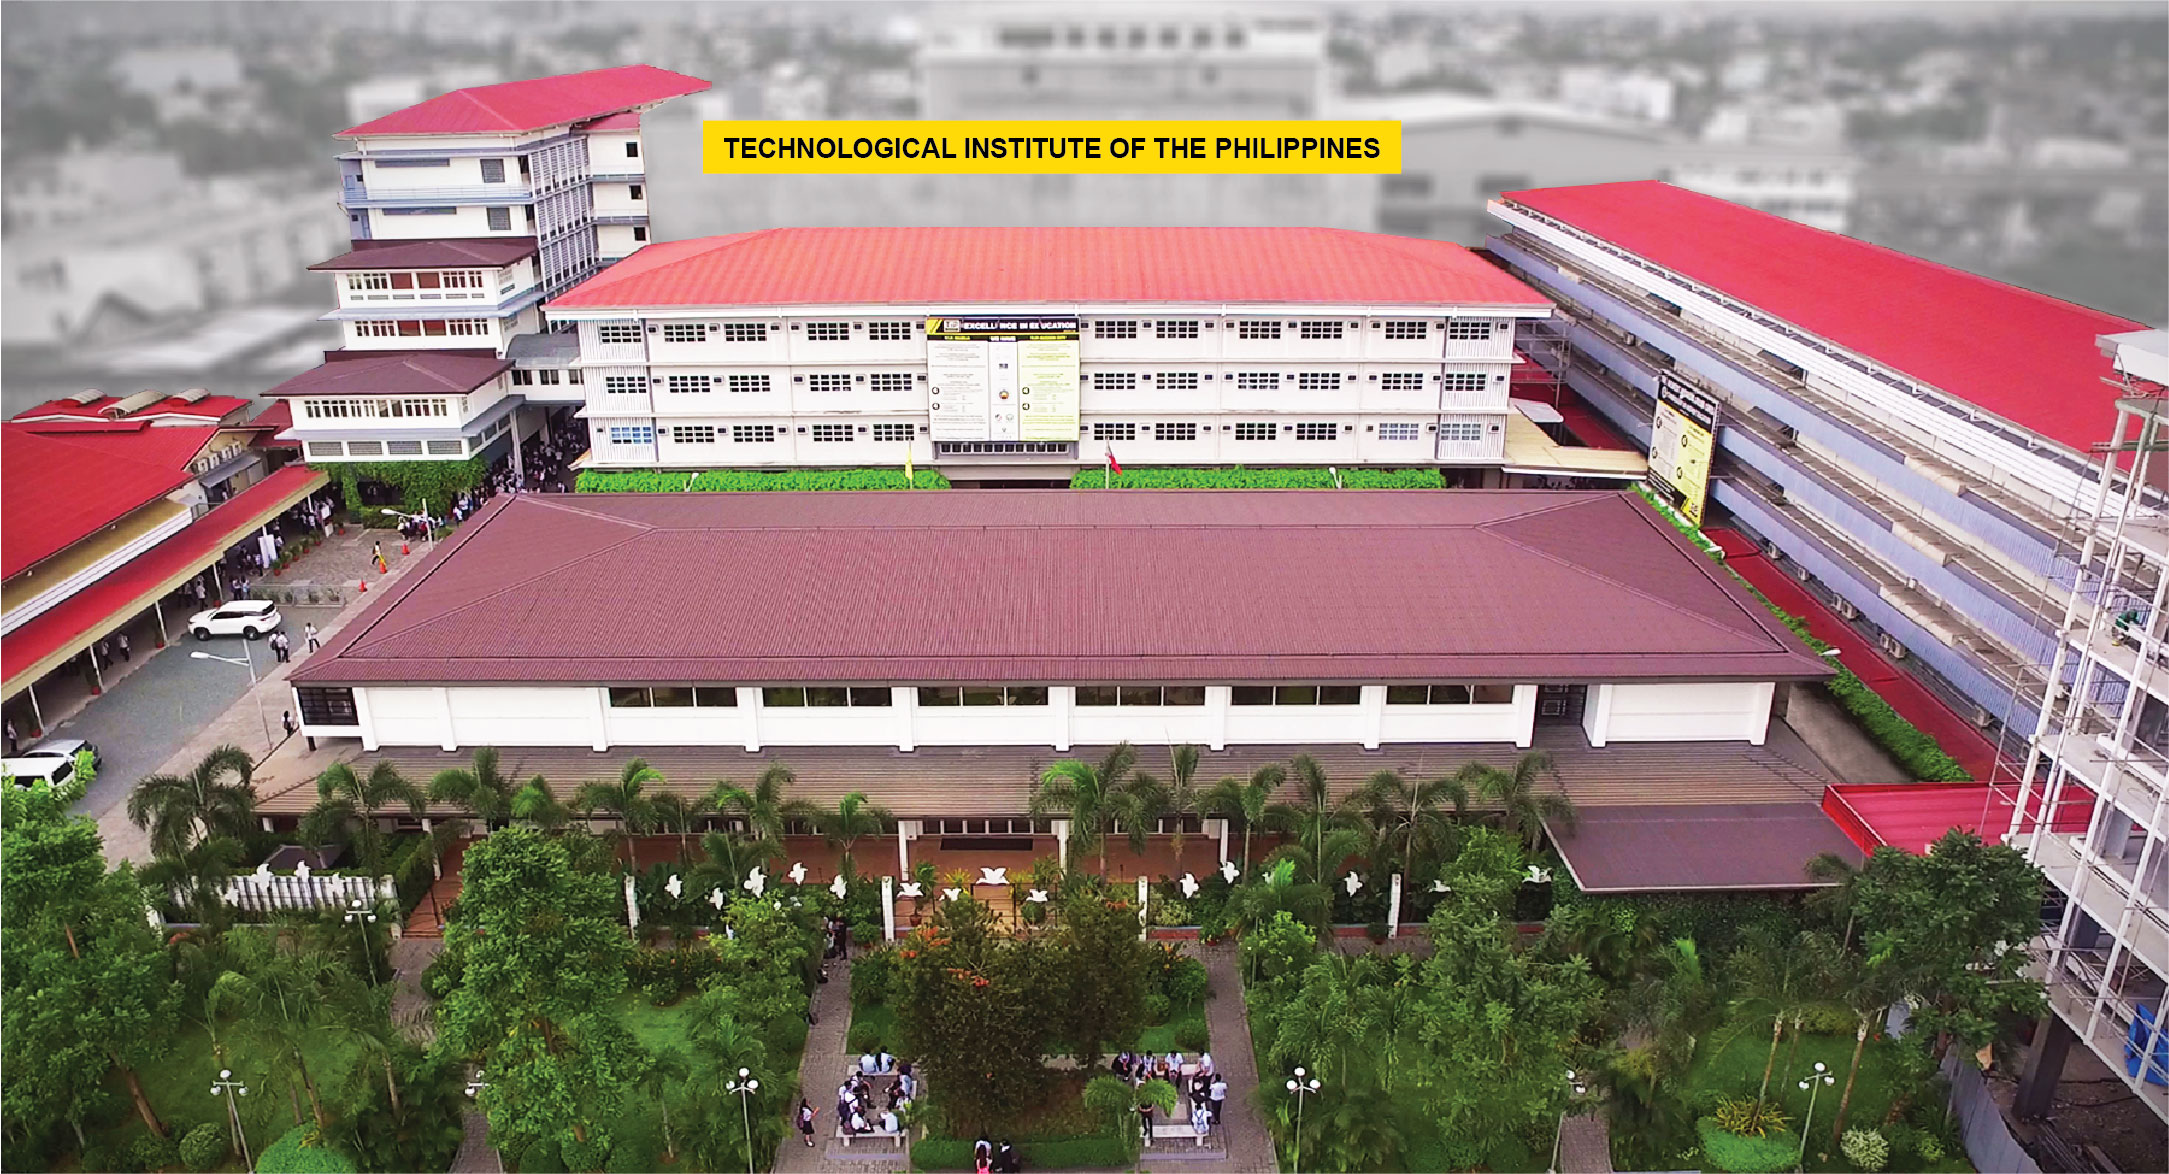 TECHNOLOGICAL INSTITUTE OF THE PHILIPPINES